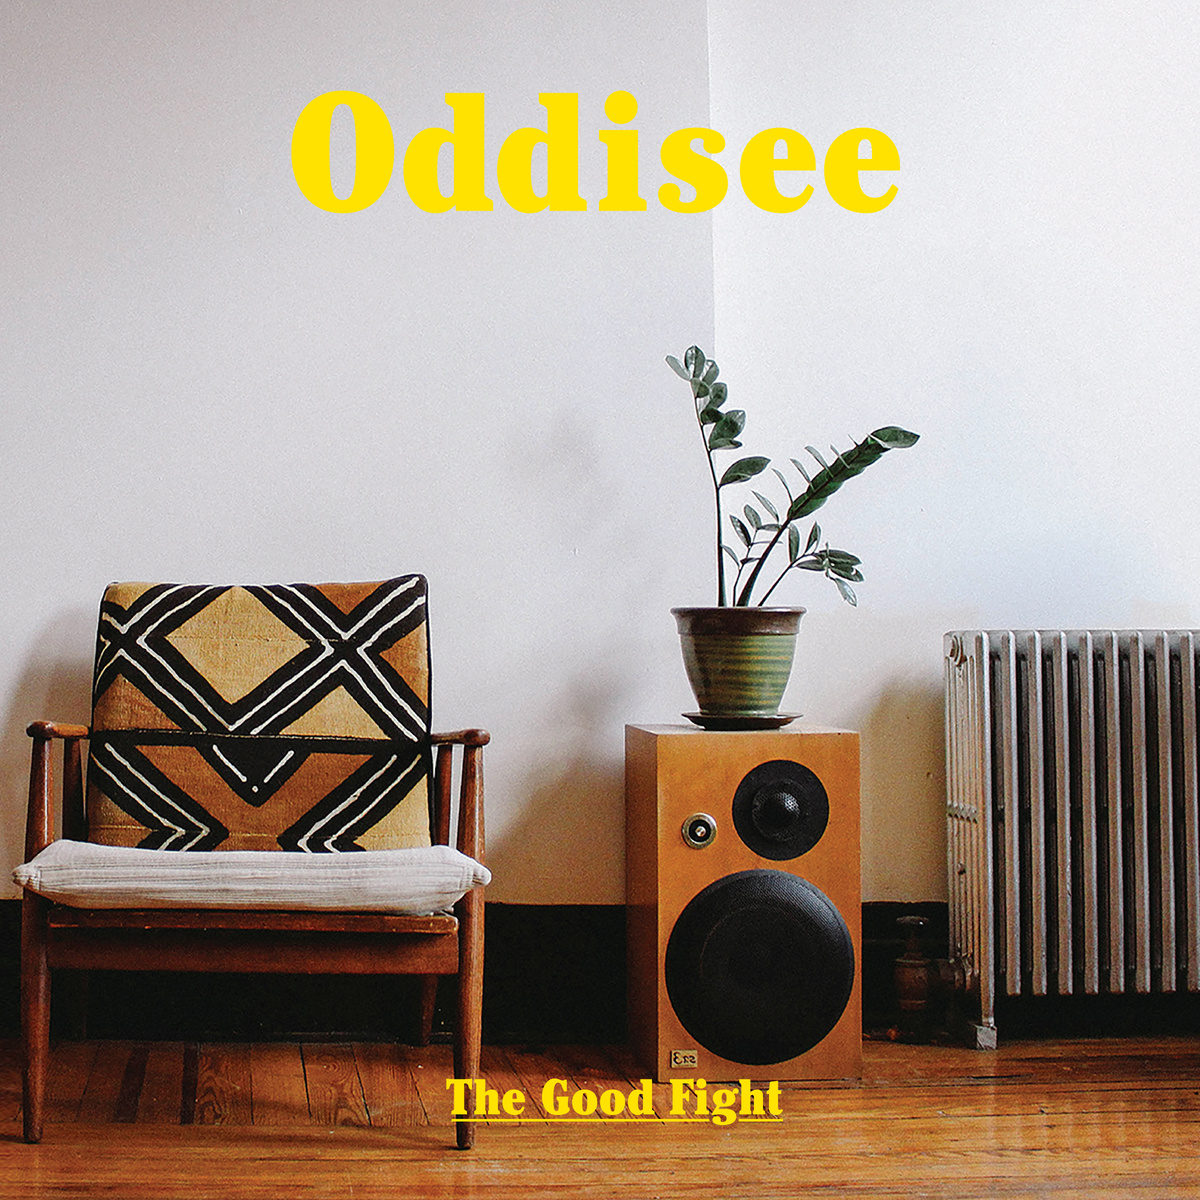 Oddisee The Good Fight